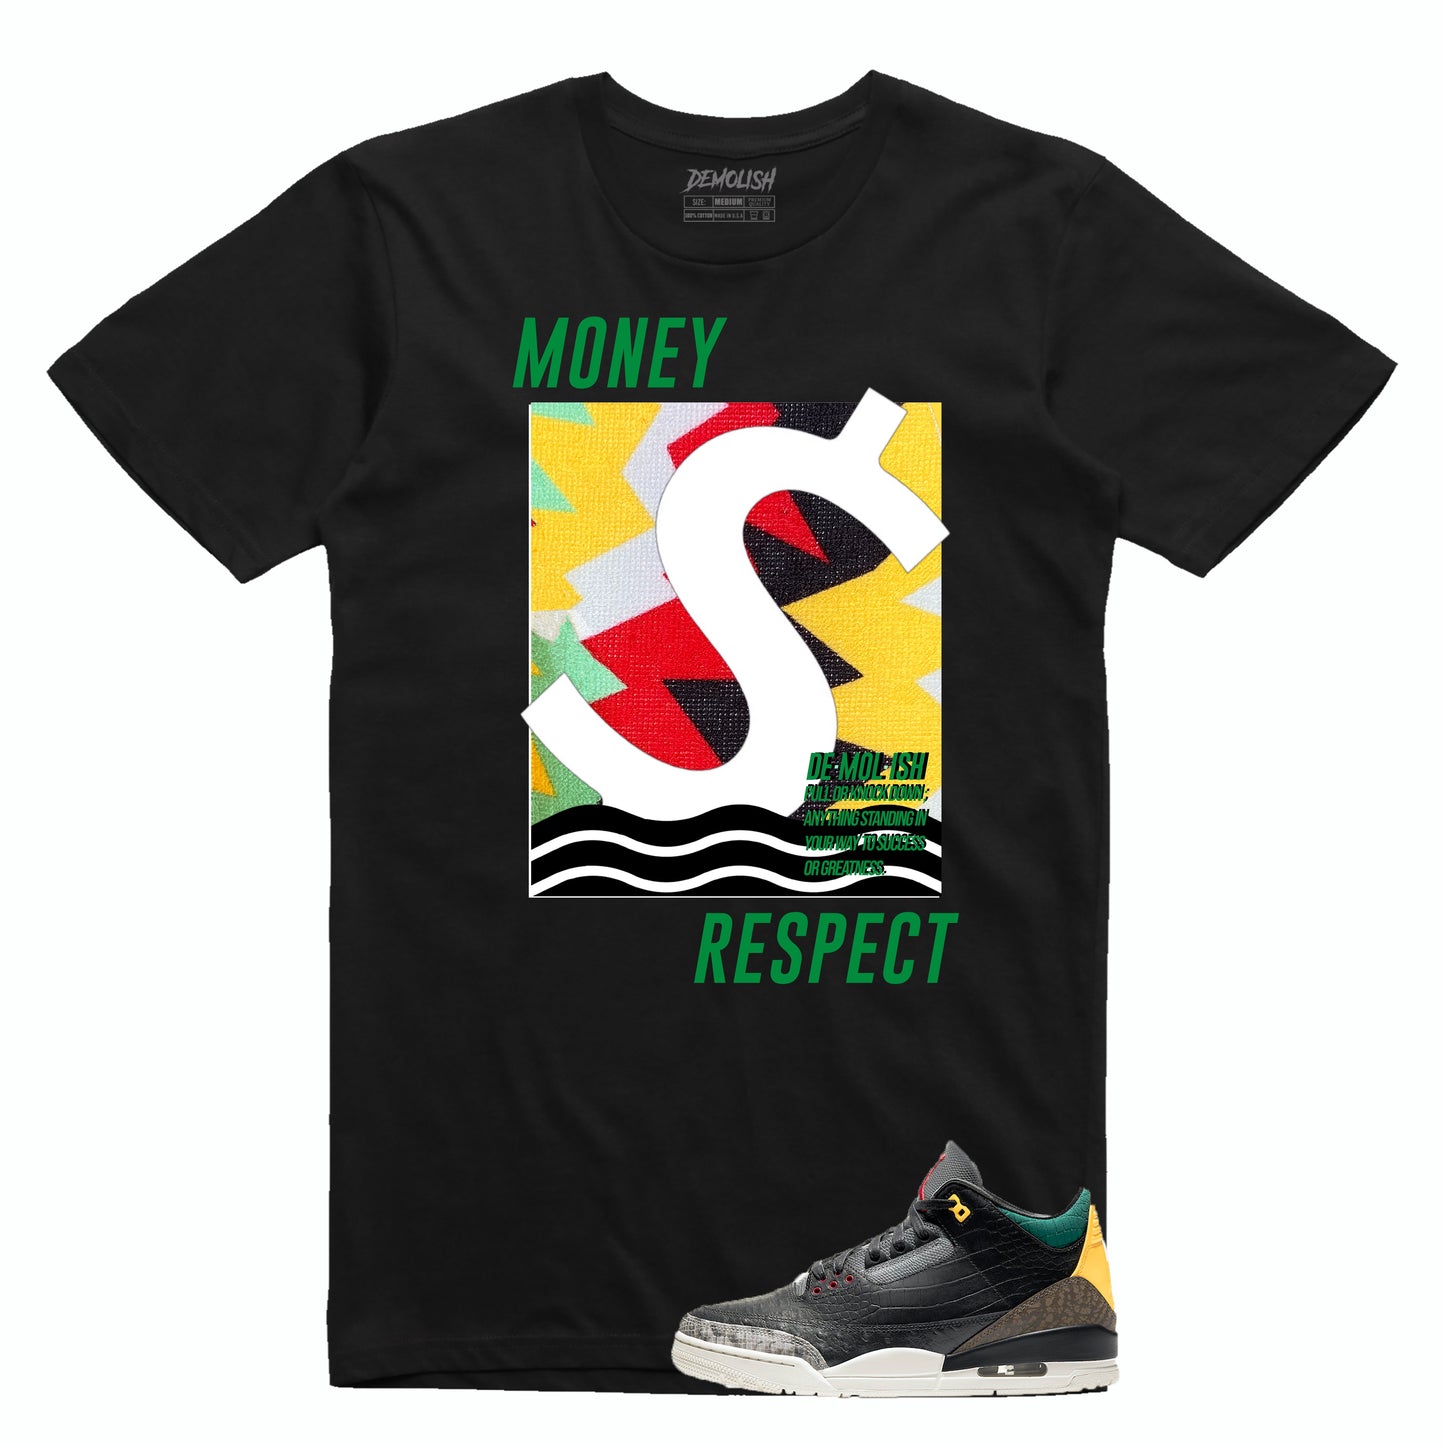 Money Respect Wave Animal Tee (Blk/Green/Red/Yllw)